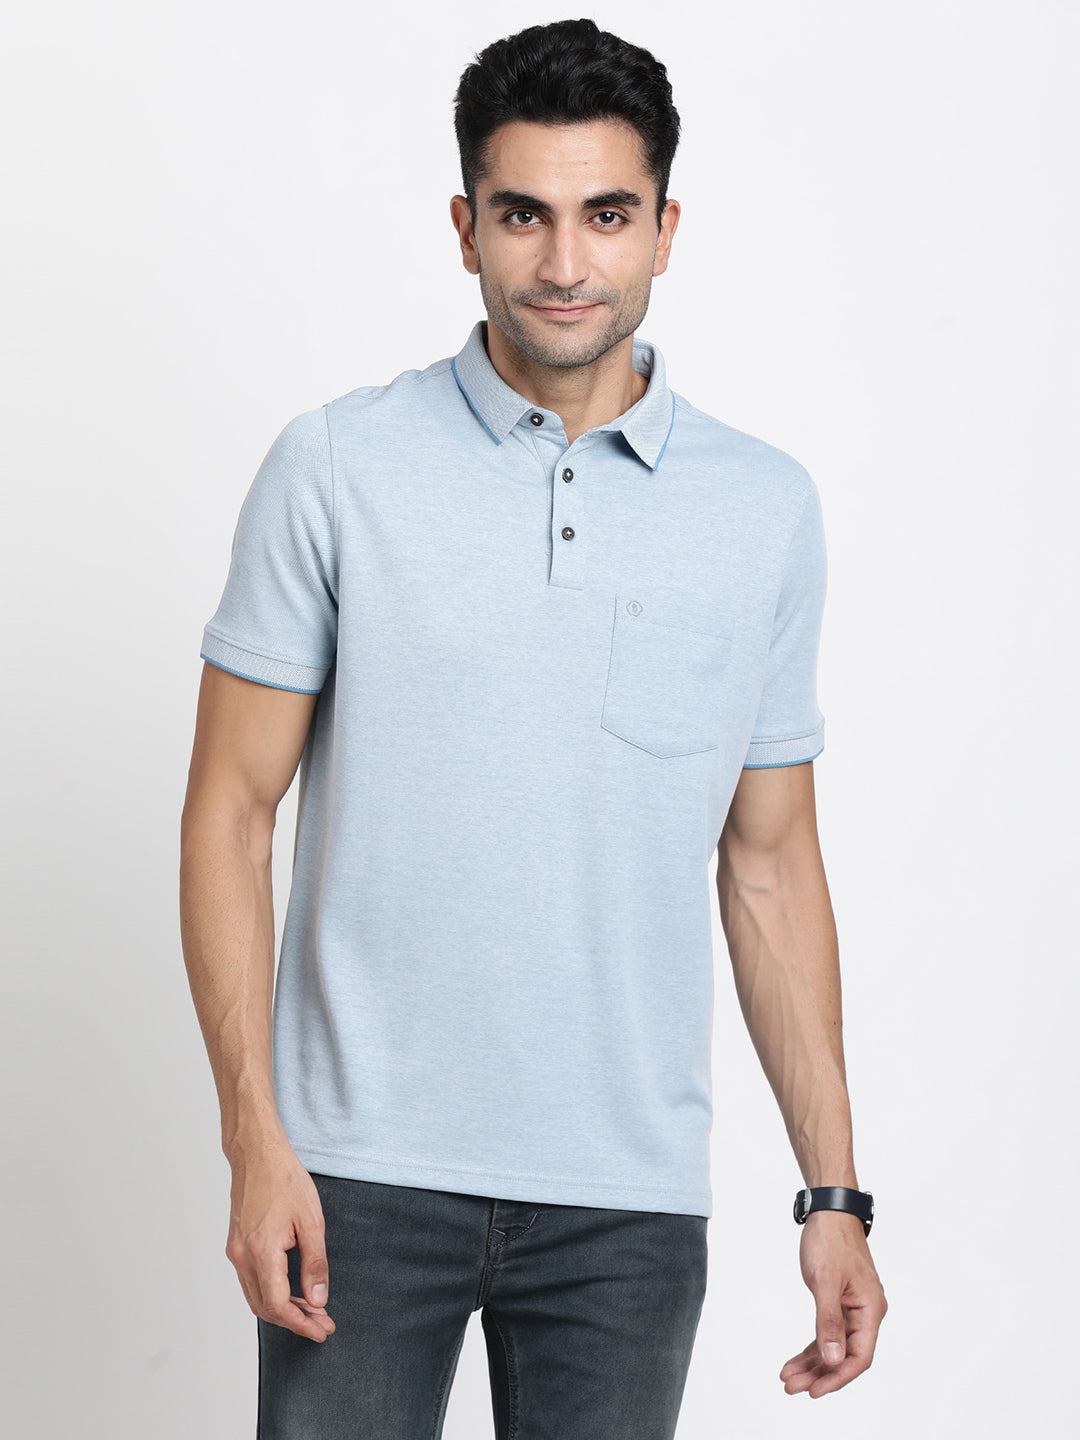 Knitted Blue Plain Polo Neck Half Sleeve Casual T-Shirt